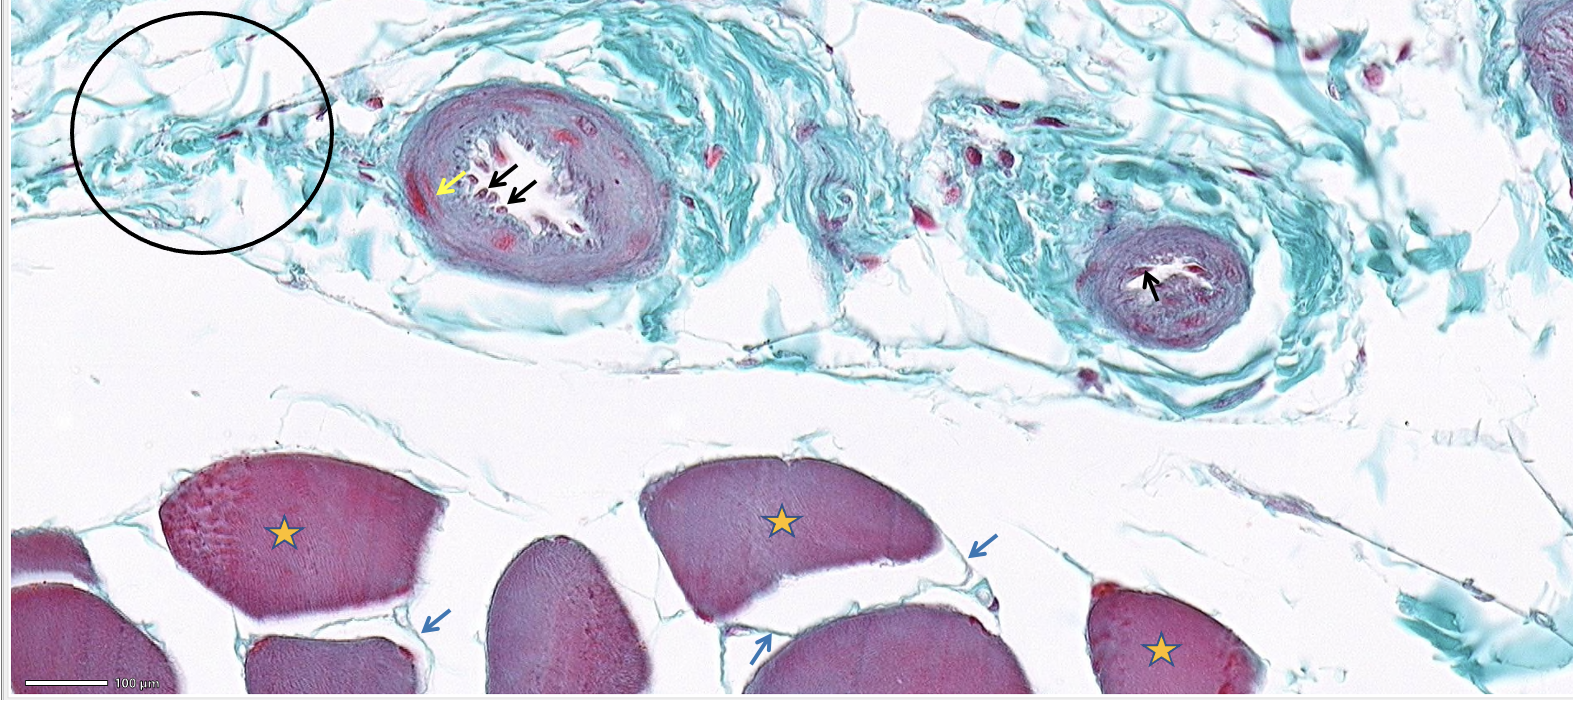 <ol><li><p>ID the cells at the tips of the black arrows</p></li><li><p>ID the cell at the tip of the yellow arrow AND what did Dr. Harp call these cells?</p></li><li><p>ID the layer and classify the tissue within the black circle.</p></li><li><p>ID the layer at the tip of the blue arrow.</p></li><li><p>ID the cells with the orange stars.</p></li></ol>